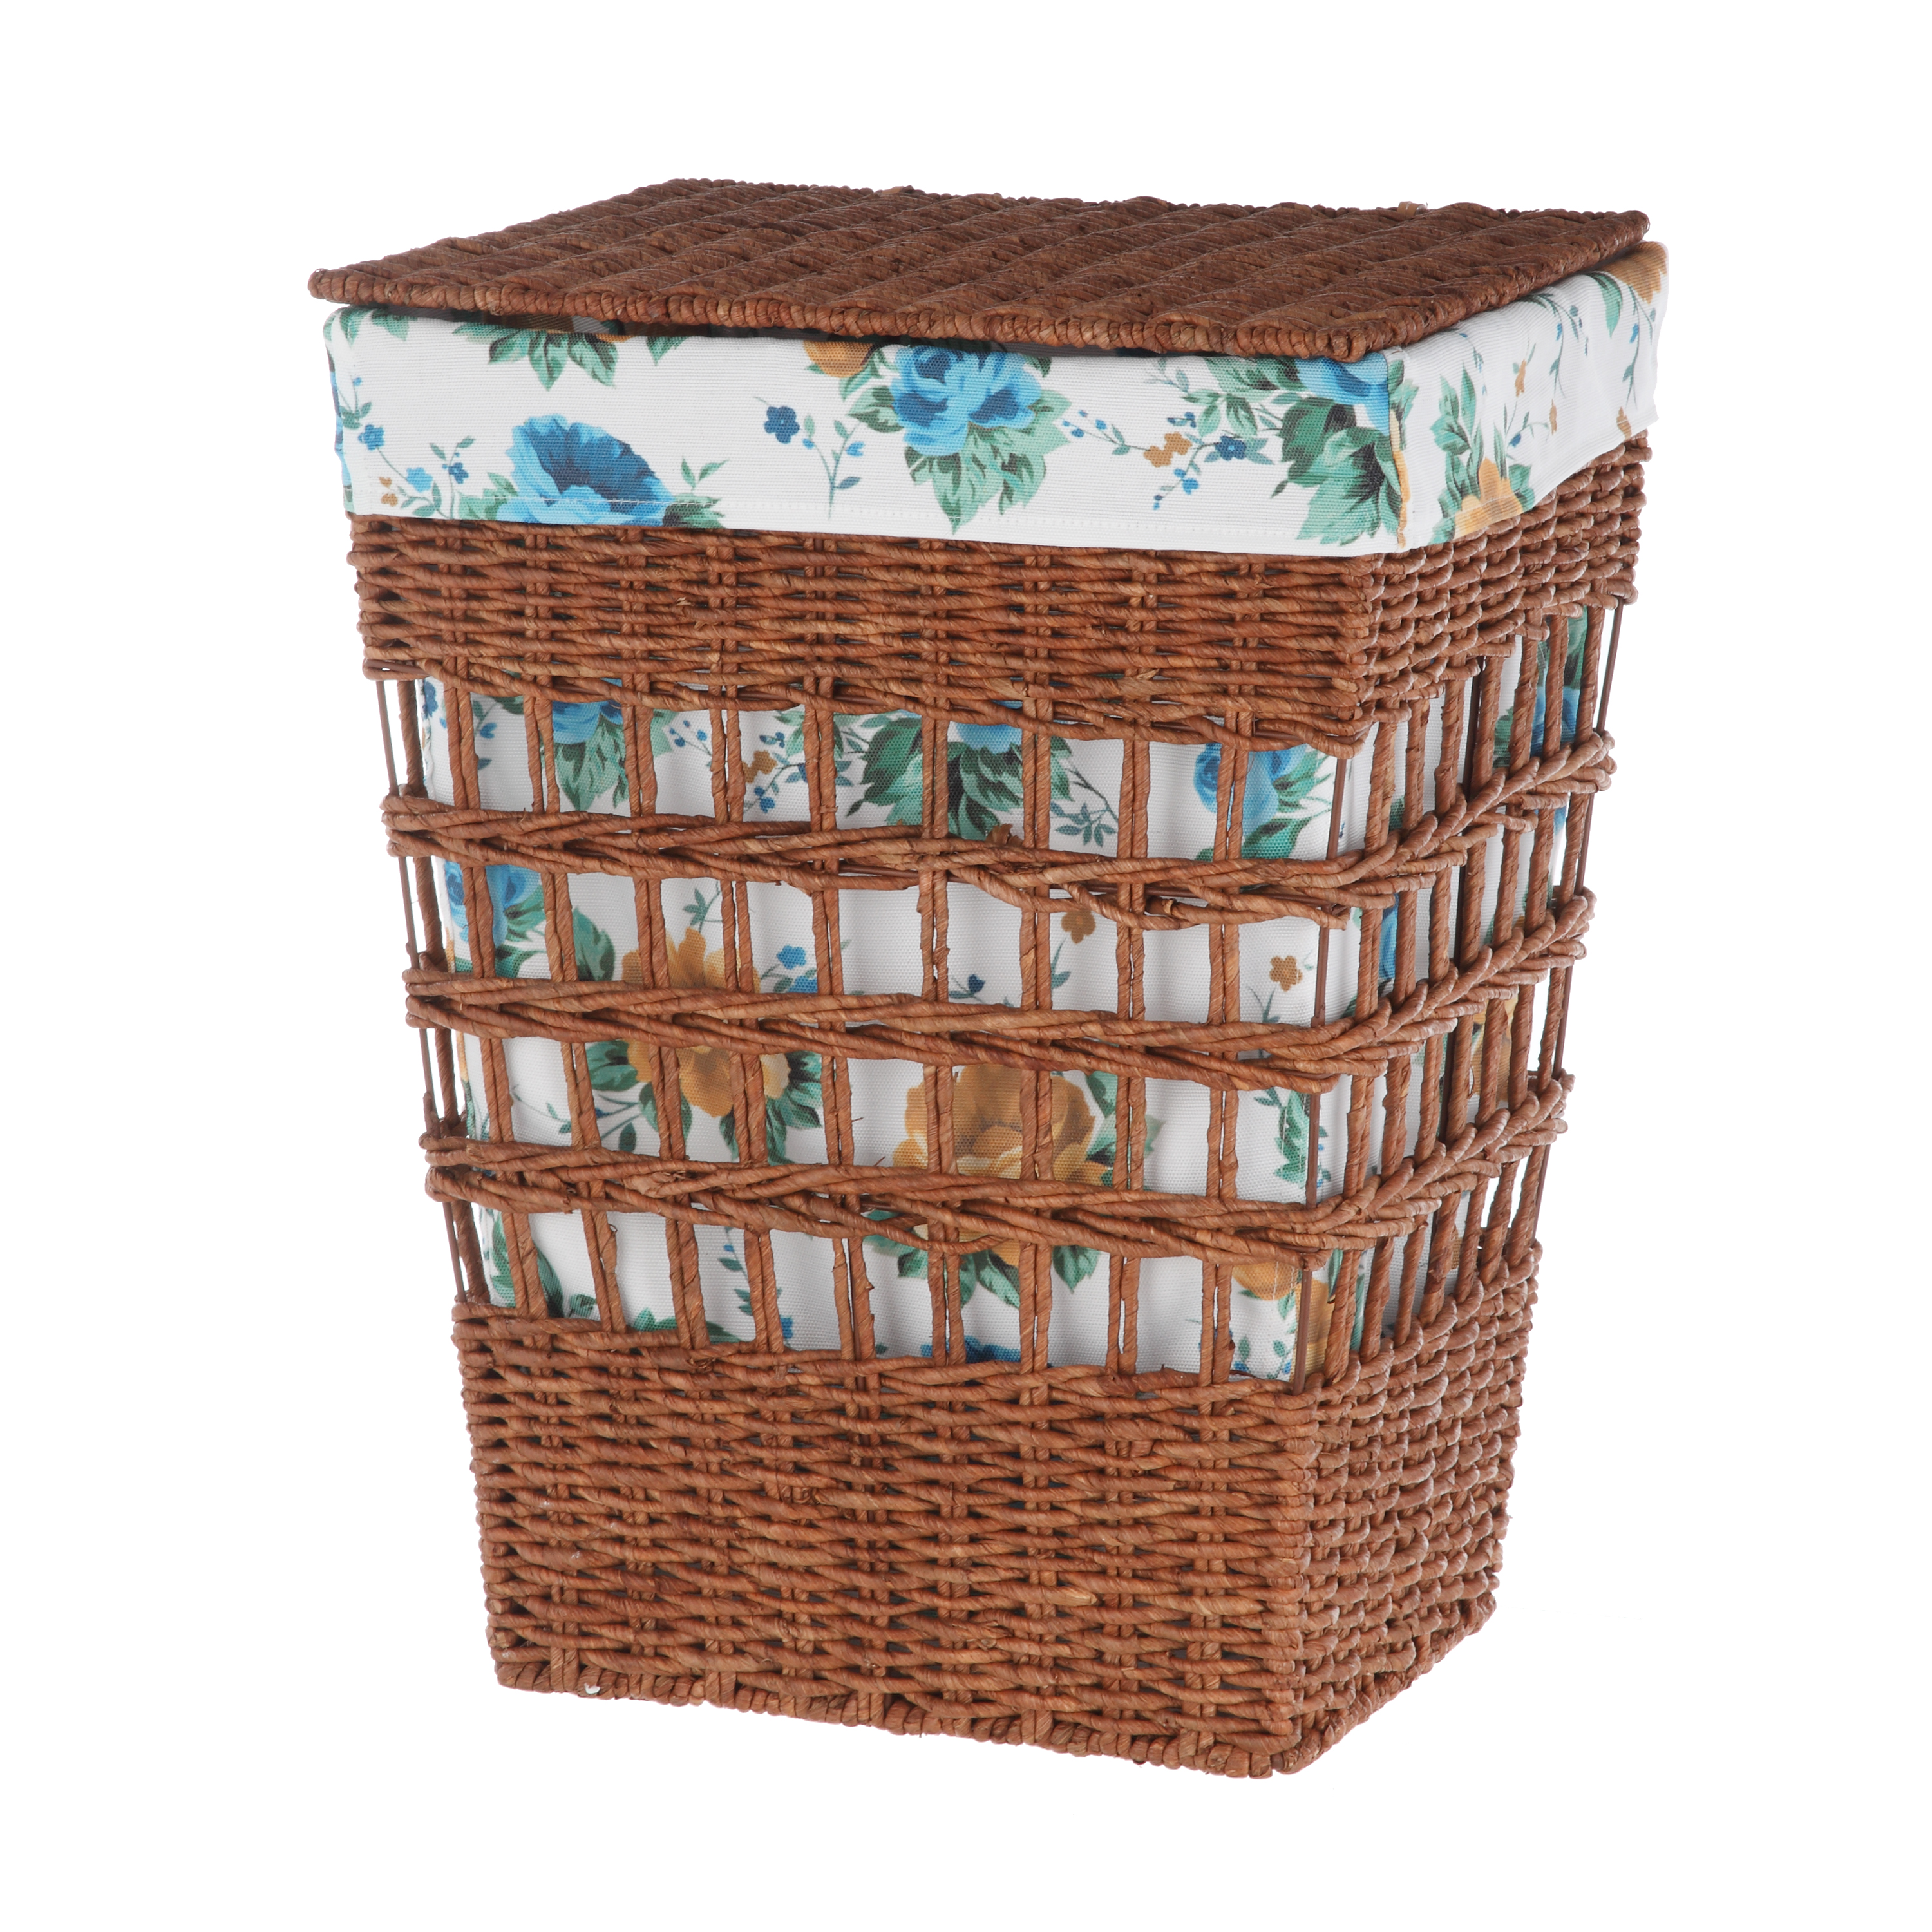 The Pioneer Woman Rose Shadow Maize Laundry Hamper - image 1 of 6